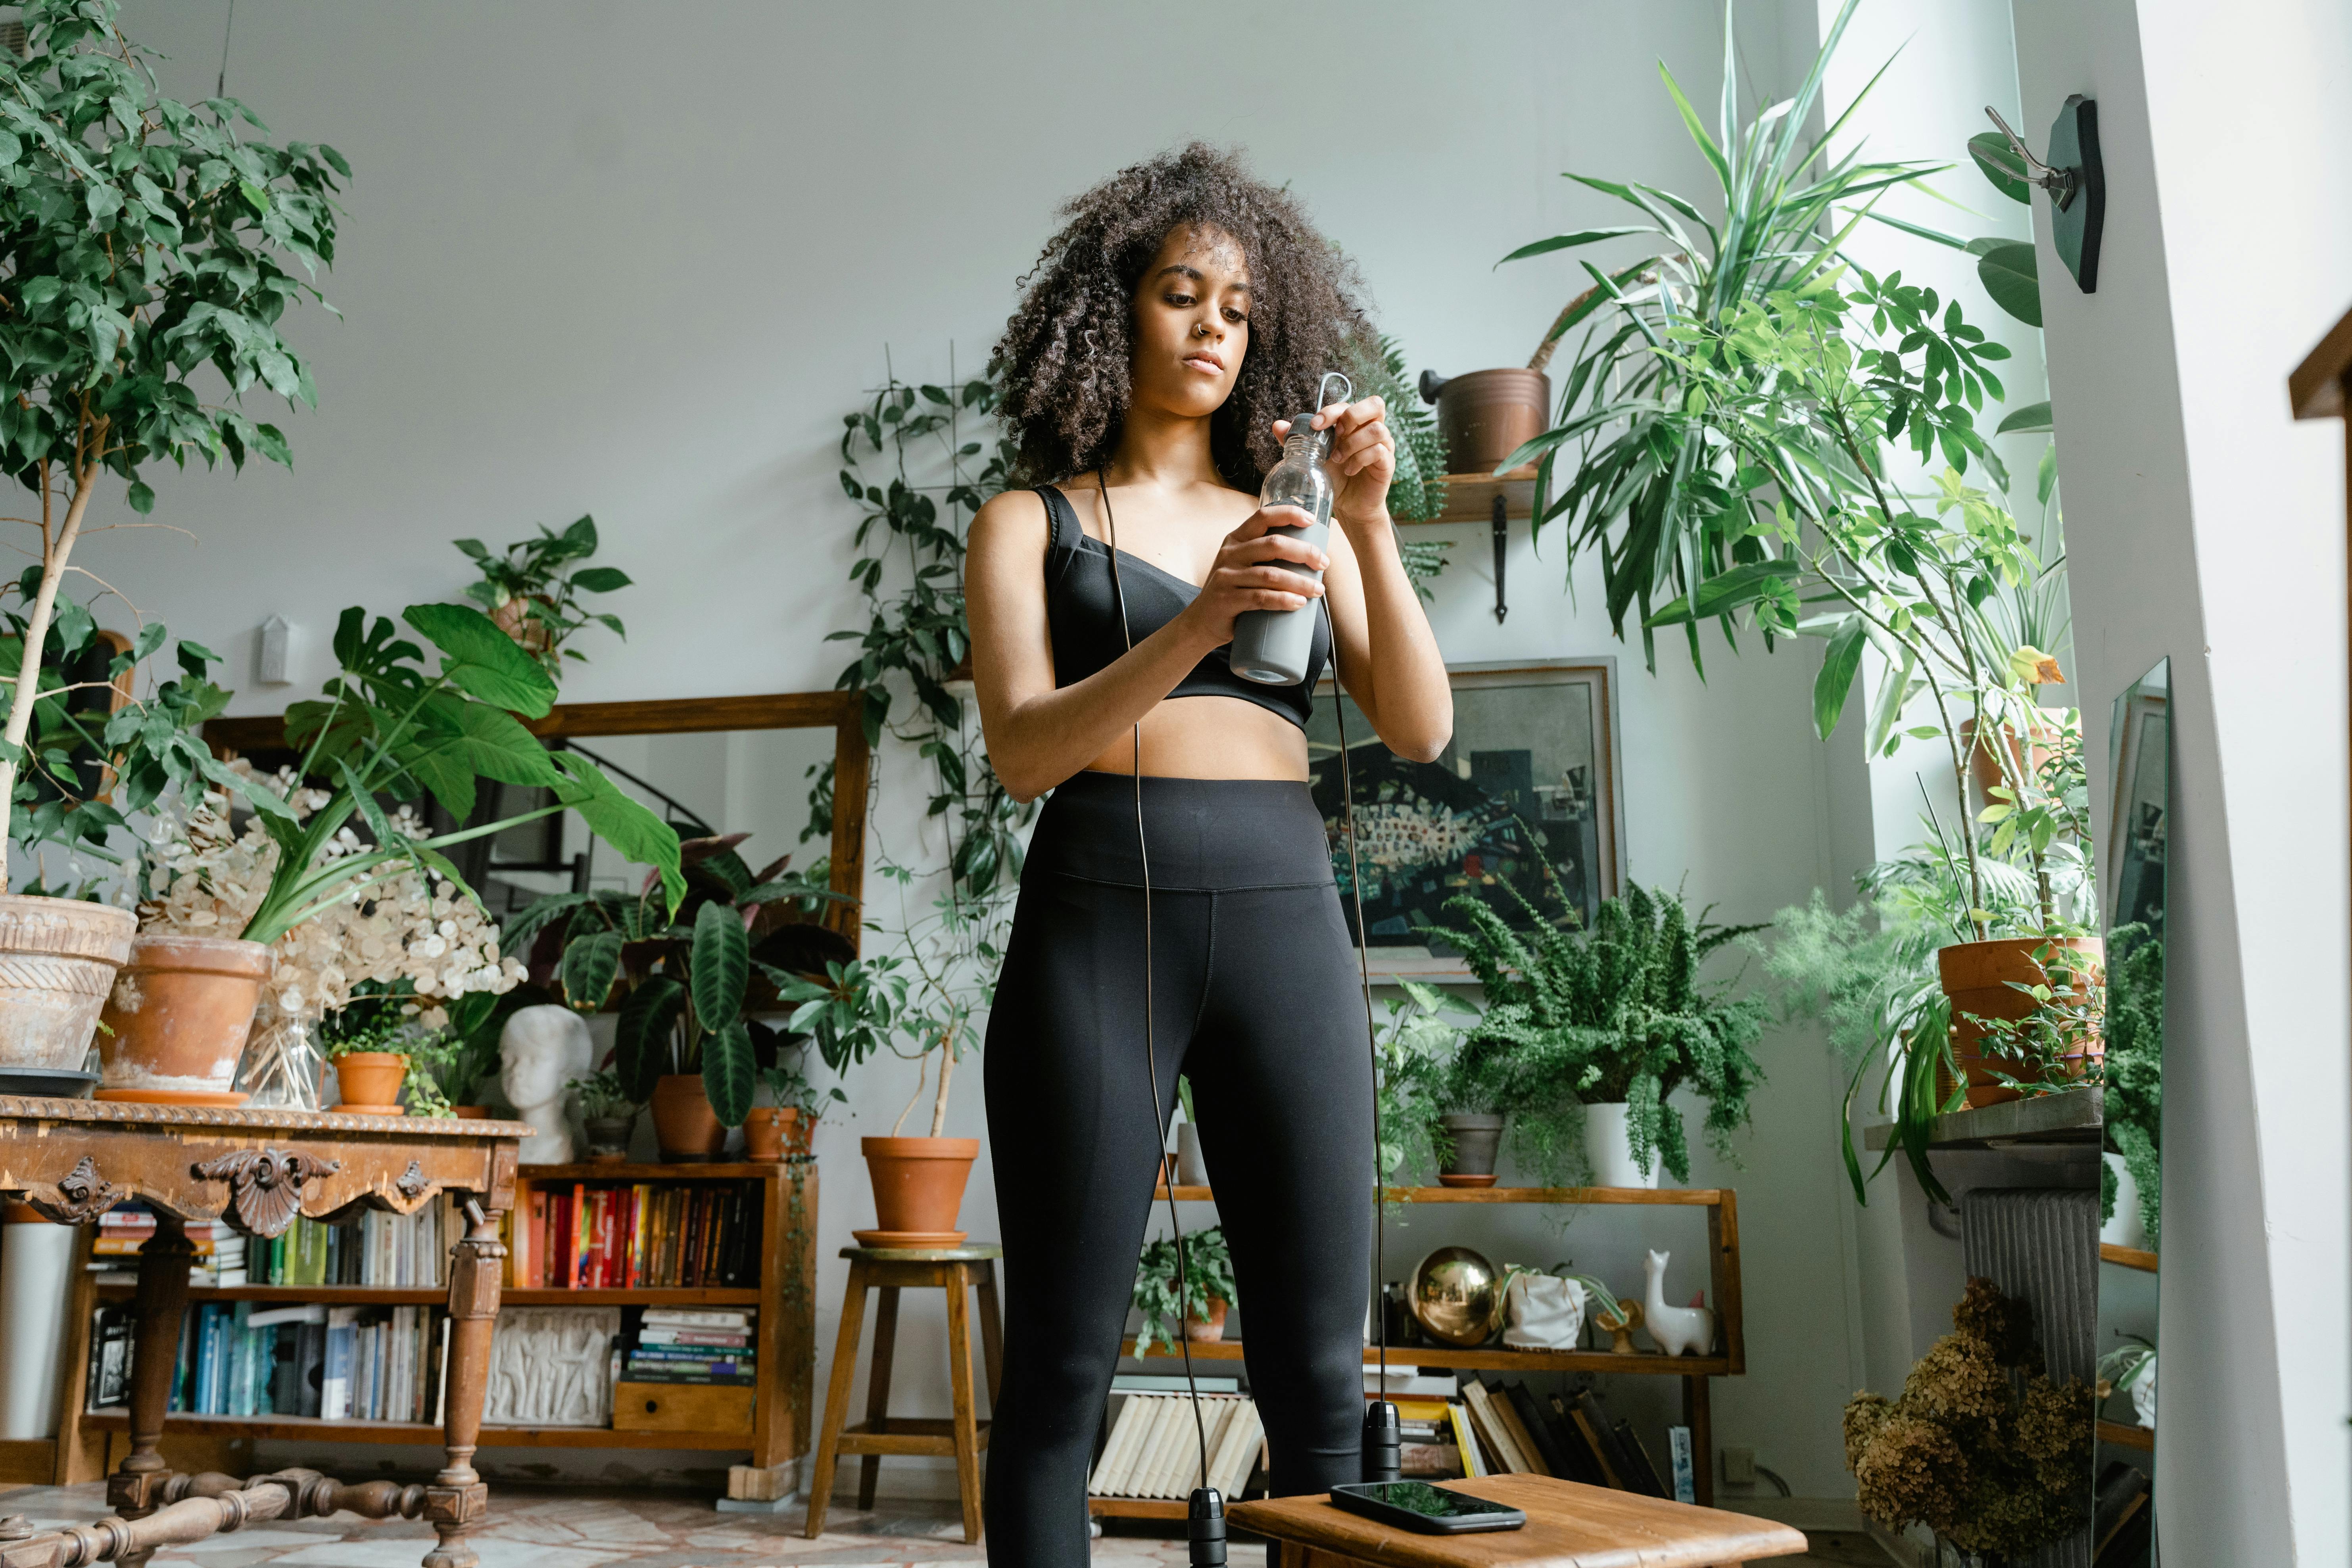 Woman Wearing a Black Workout Clothes · Free Stock Photo